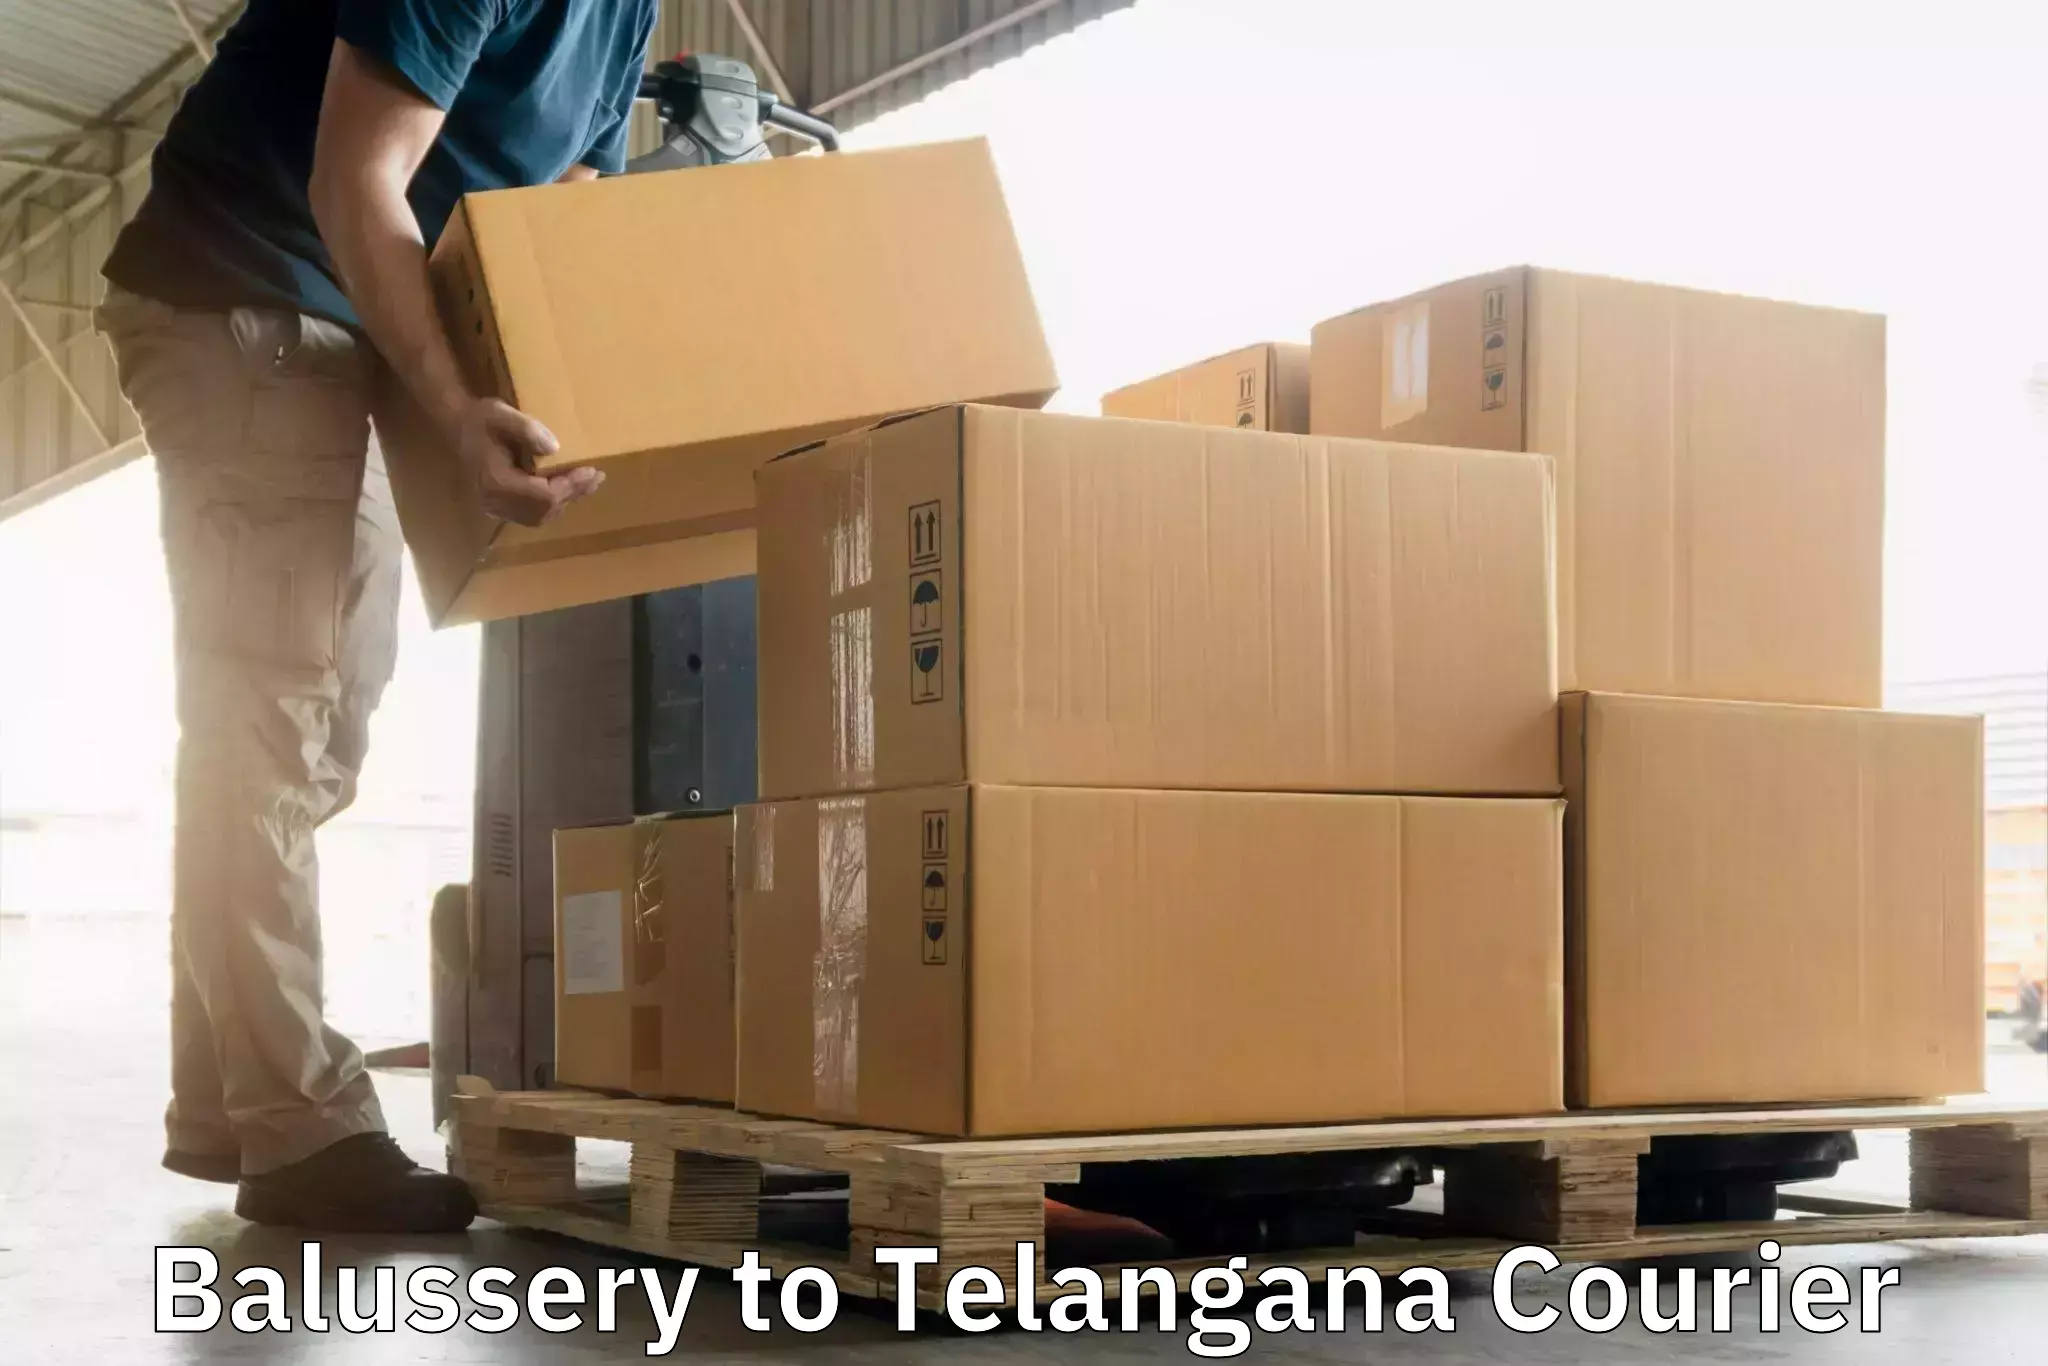 Efficient order fulfillment Balussery to Telangana